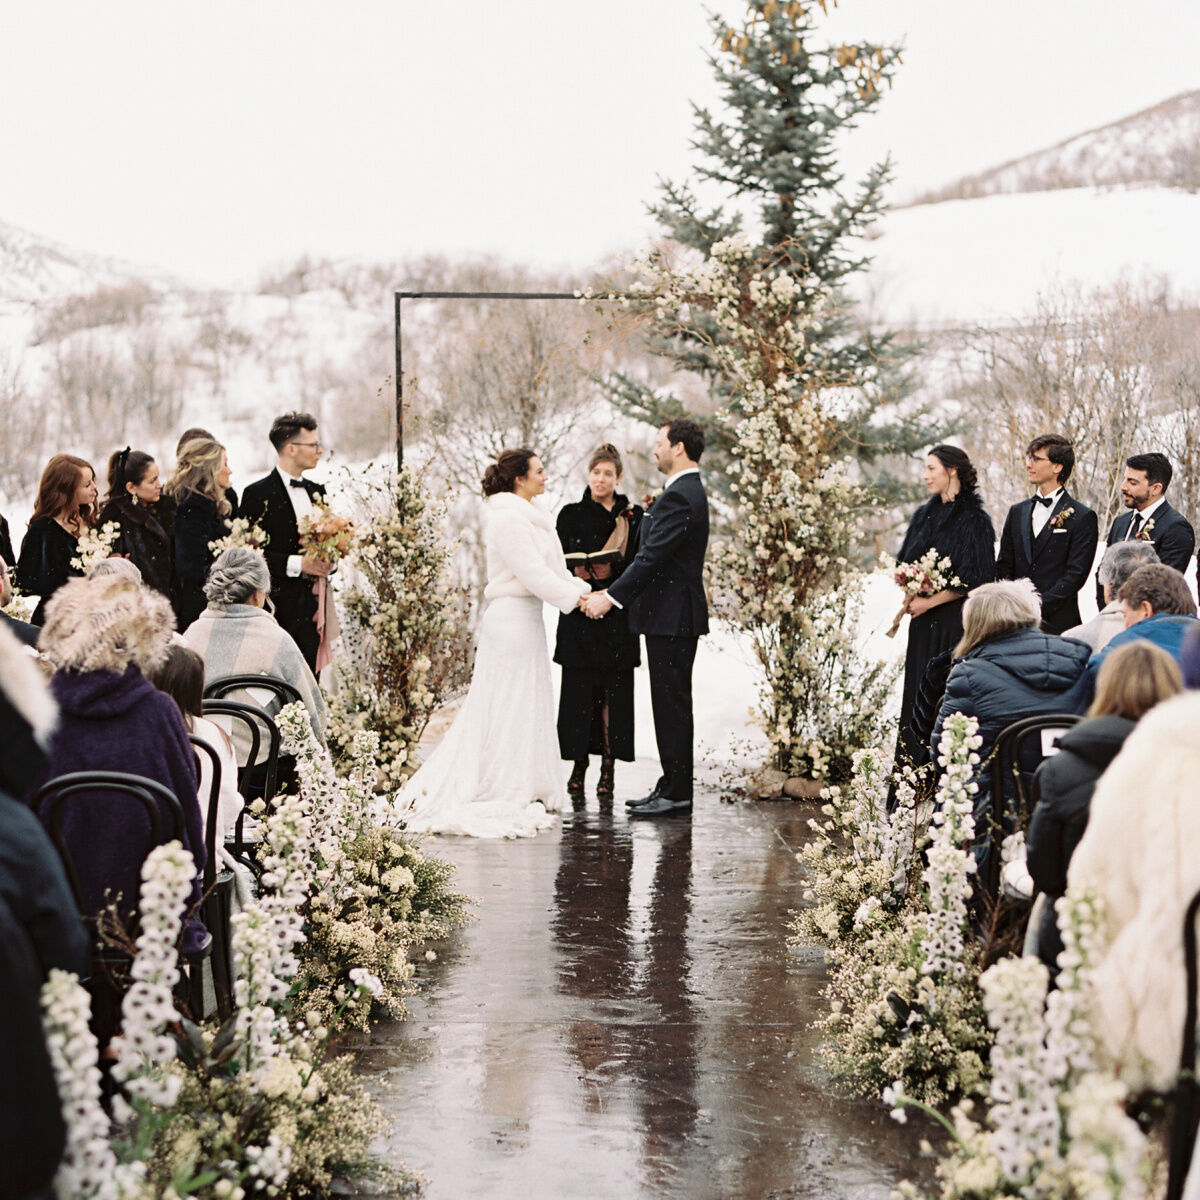 Teissia and Todd's snowy winter wedding ceremony